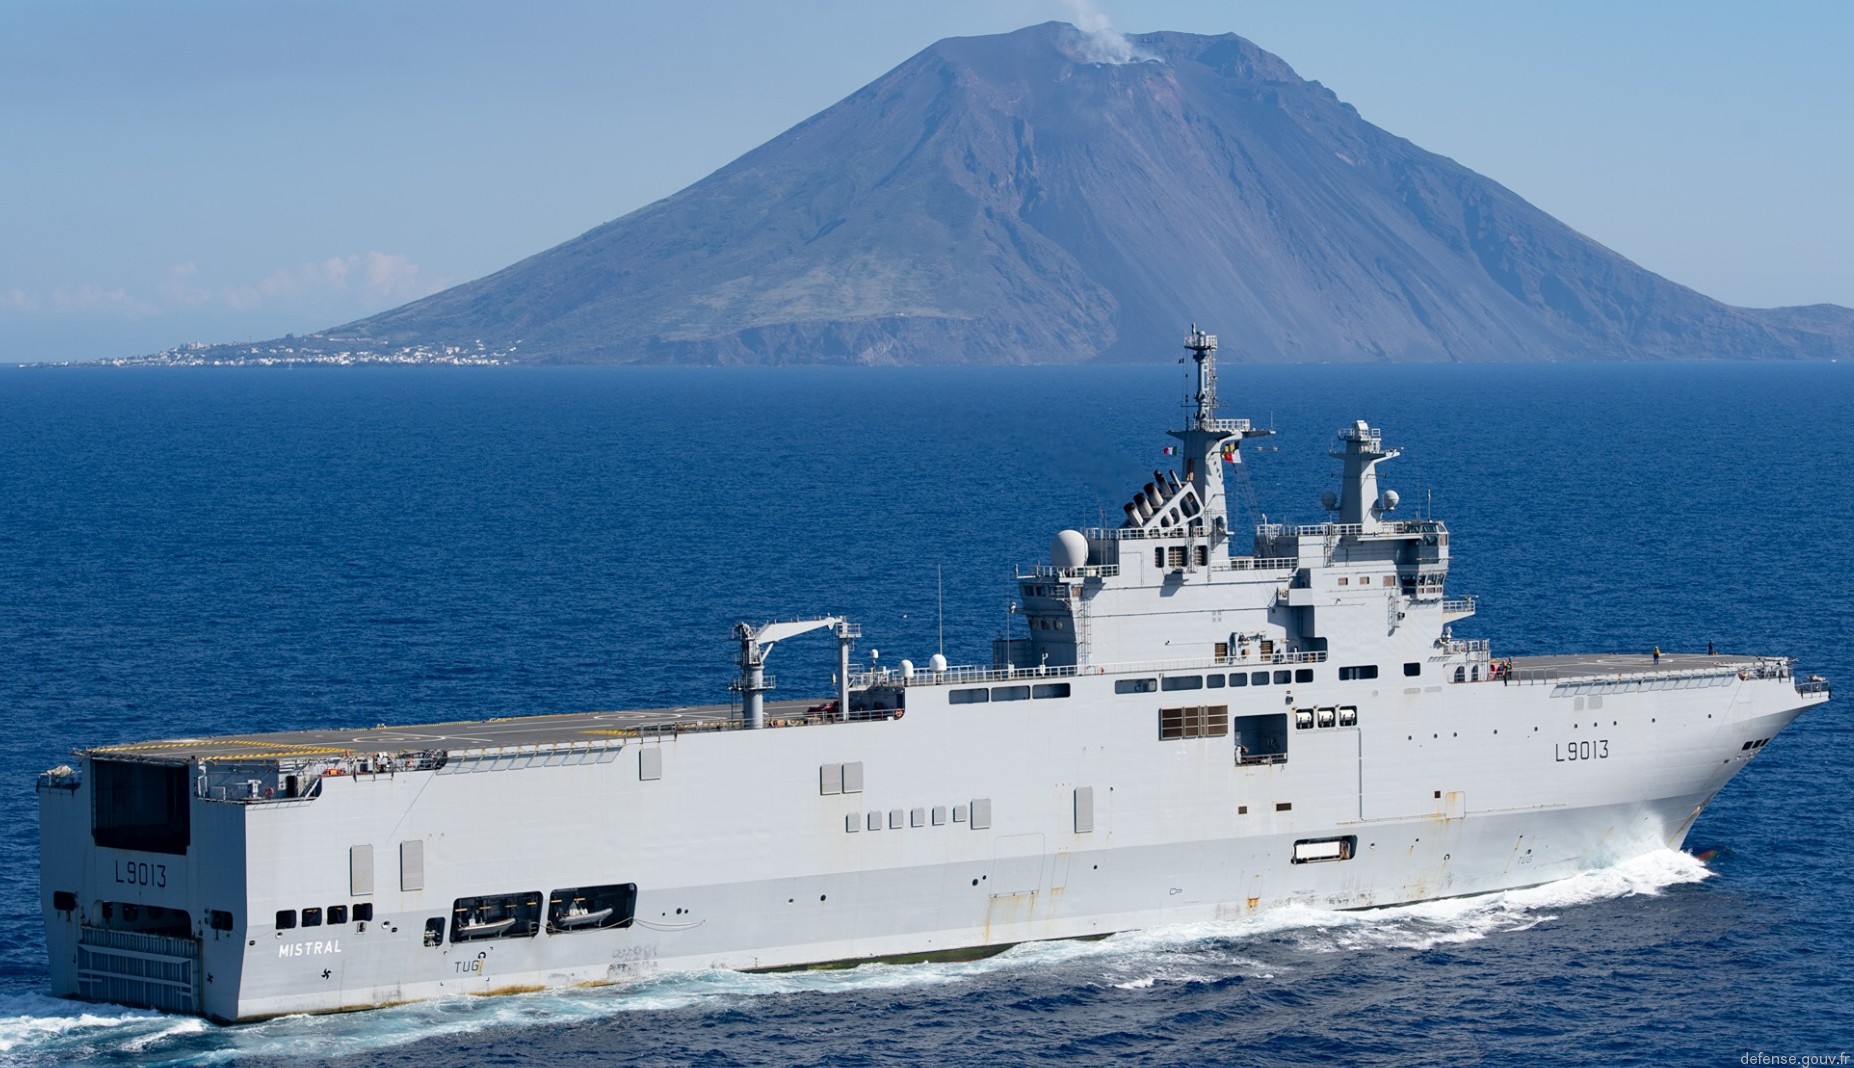 l-9013 fs mistral amphibious assault command ship french navy marine nationale 60